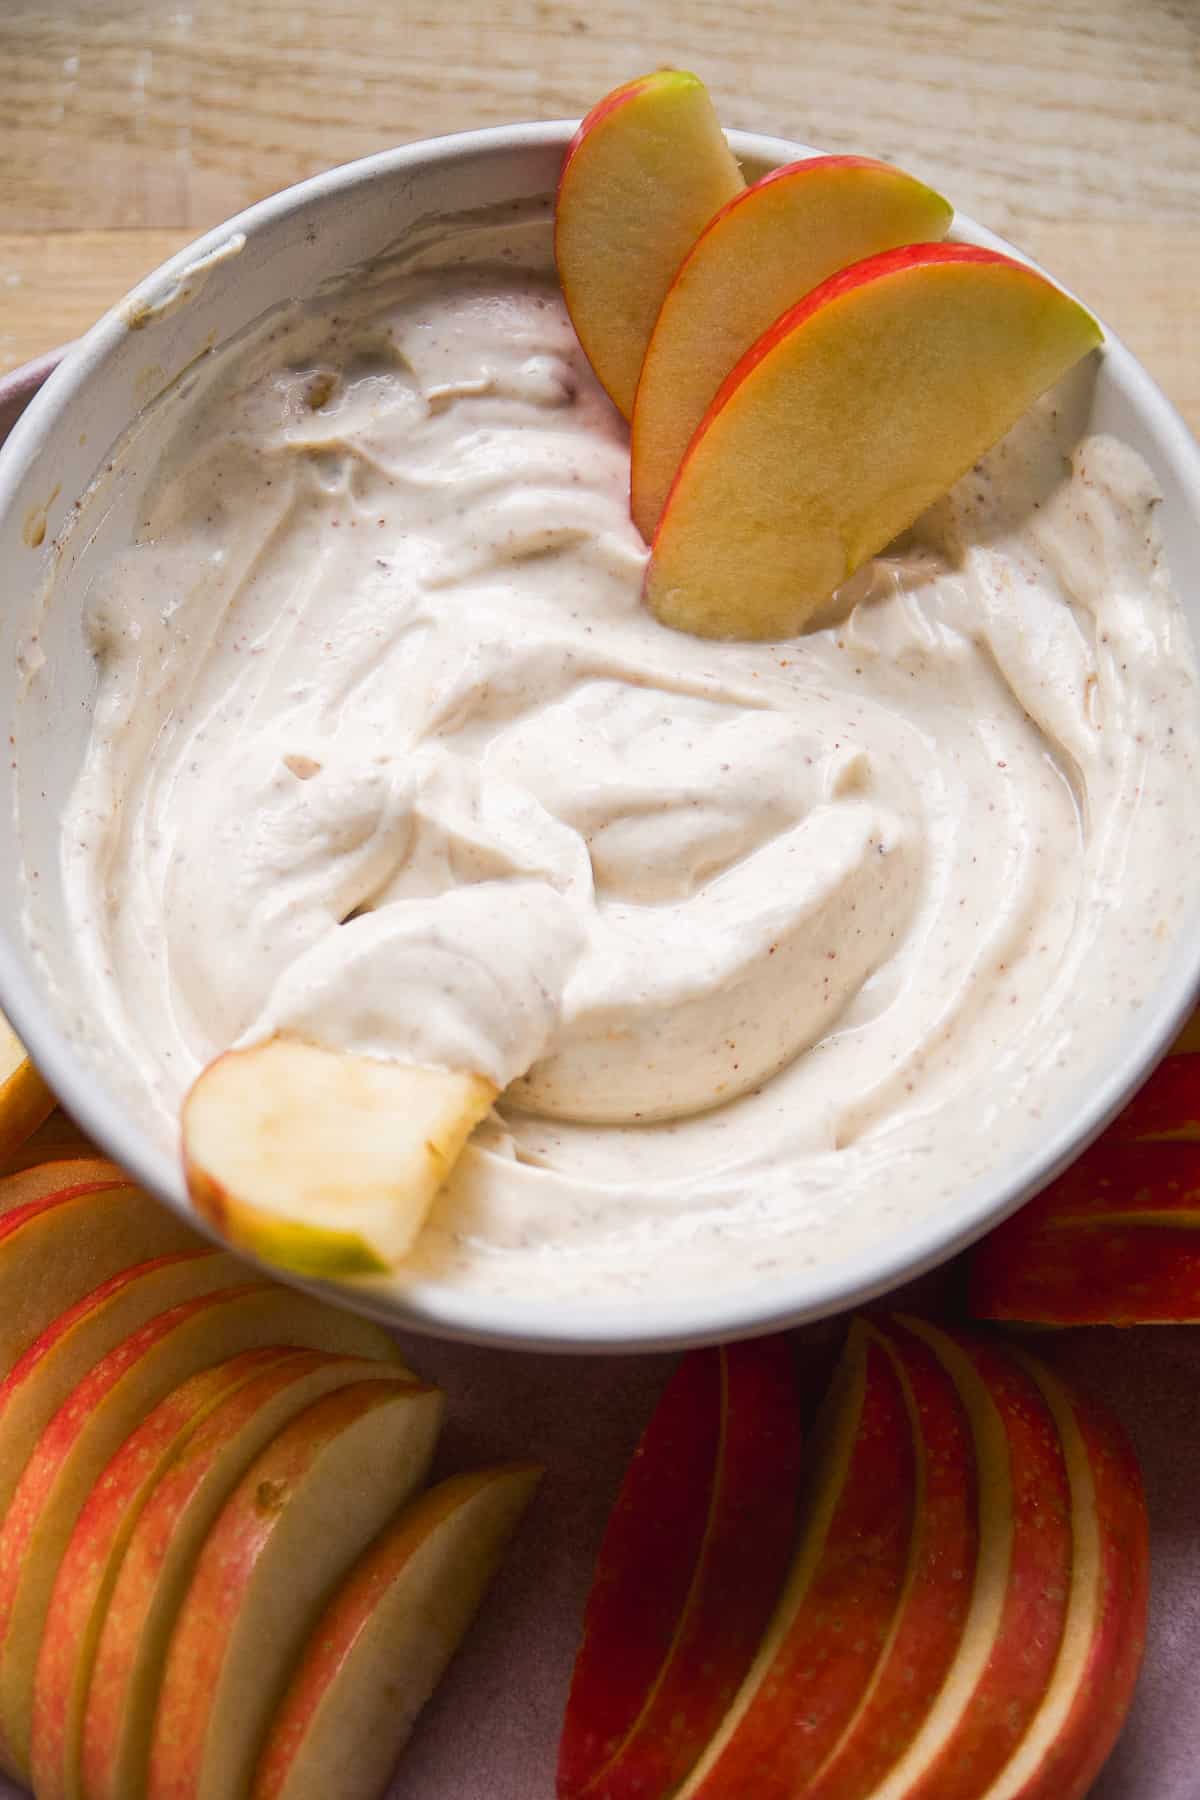 Almond butter yogurt fruit dip with apple slices on the side.